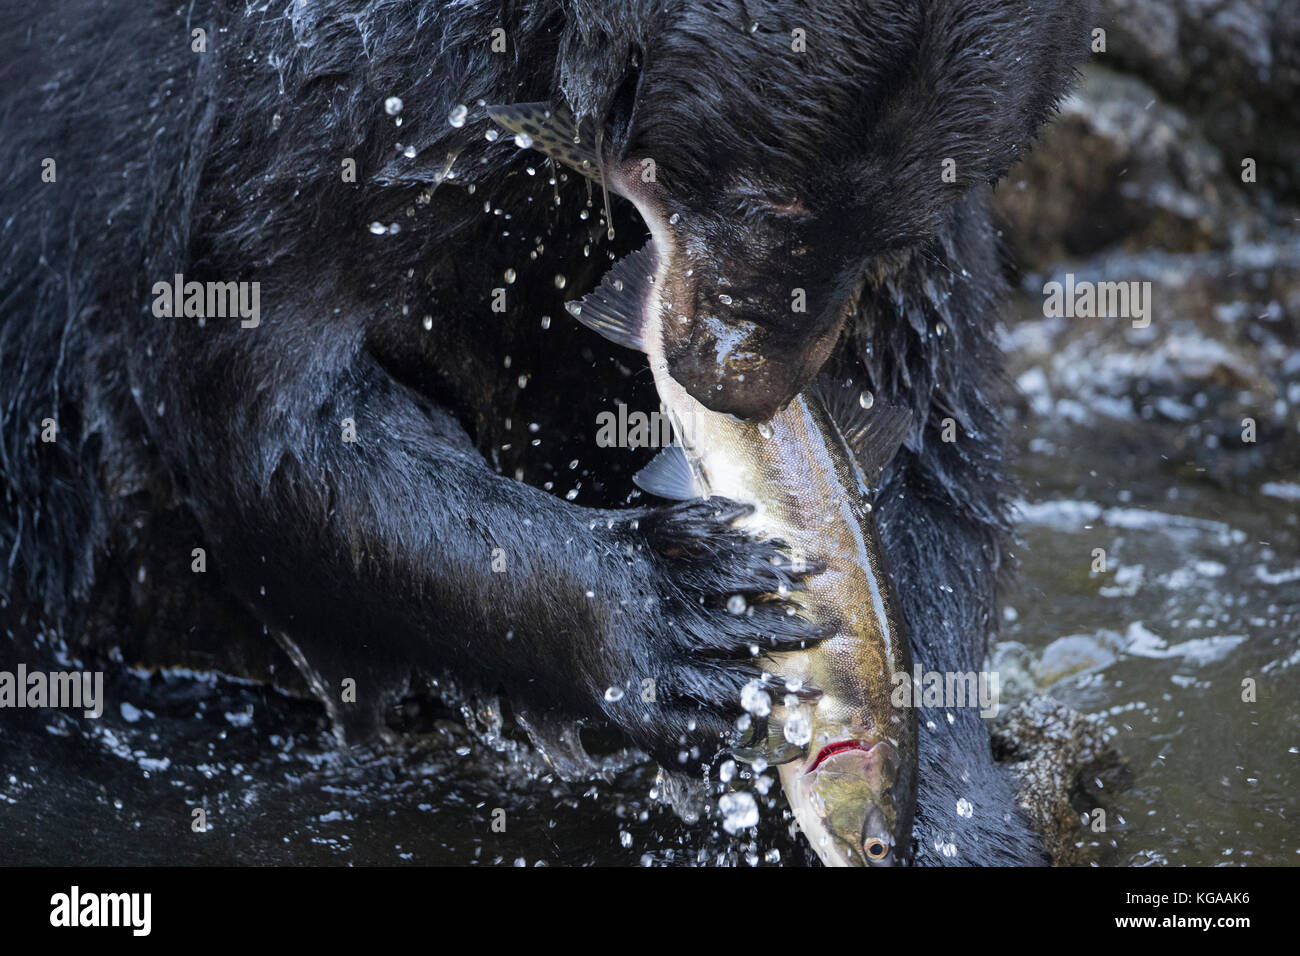 Black Bear with Salmon in mouth Stock Photo